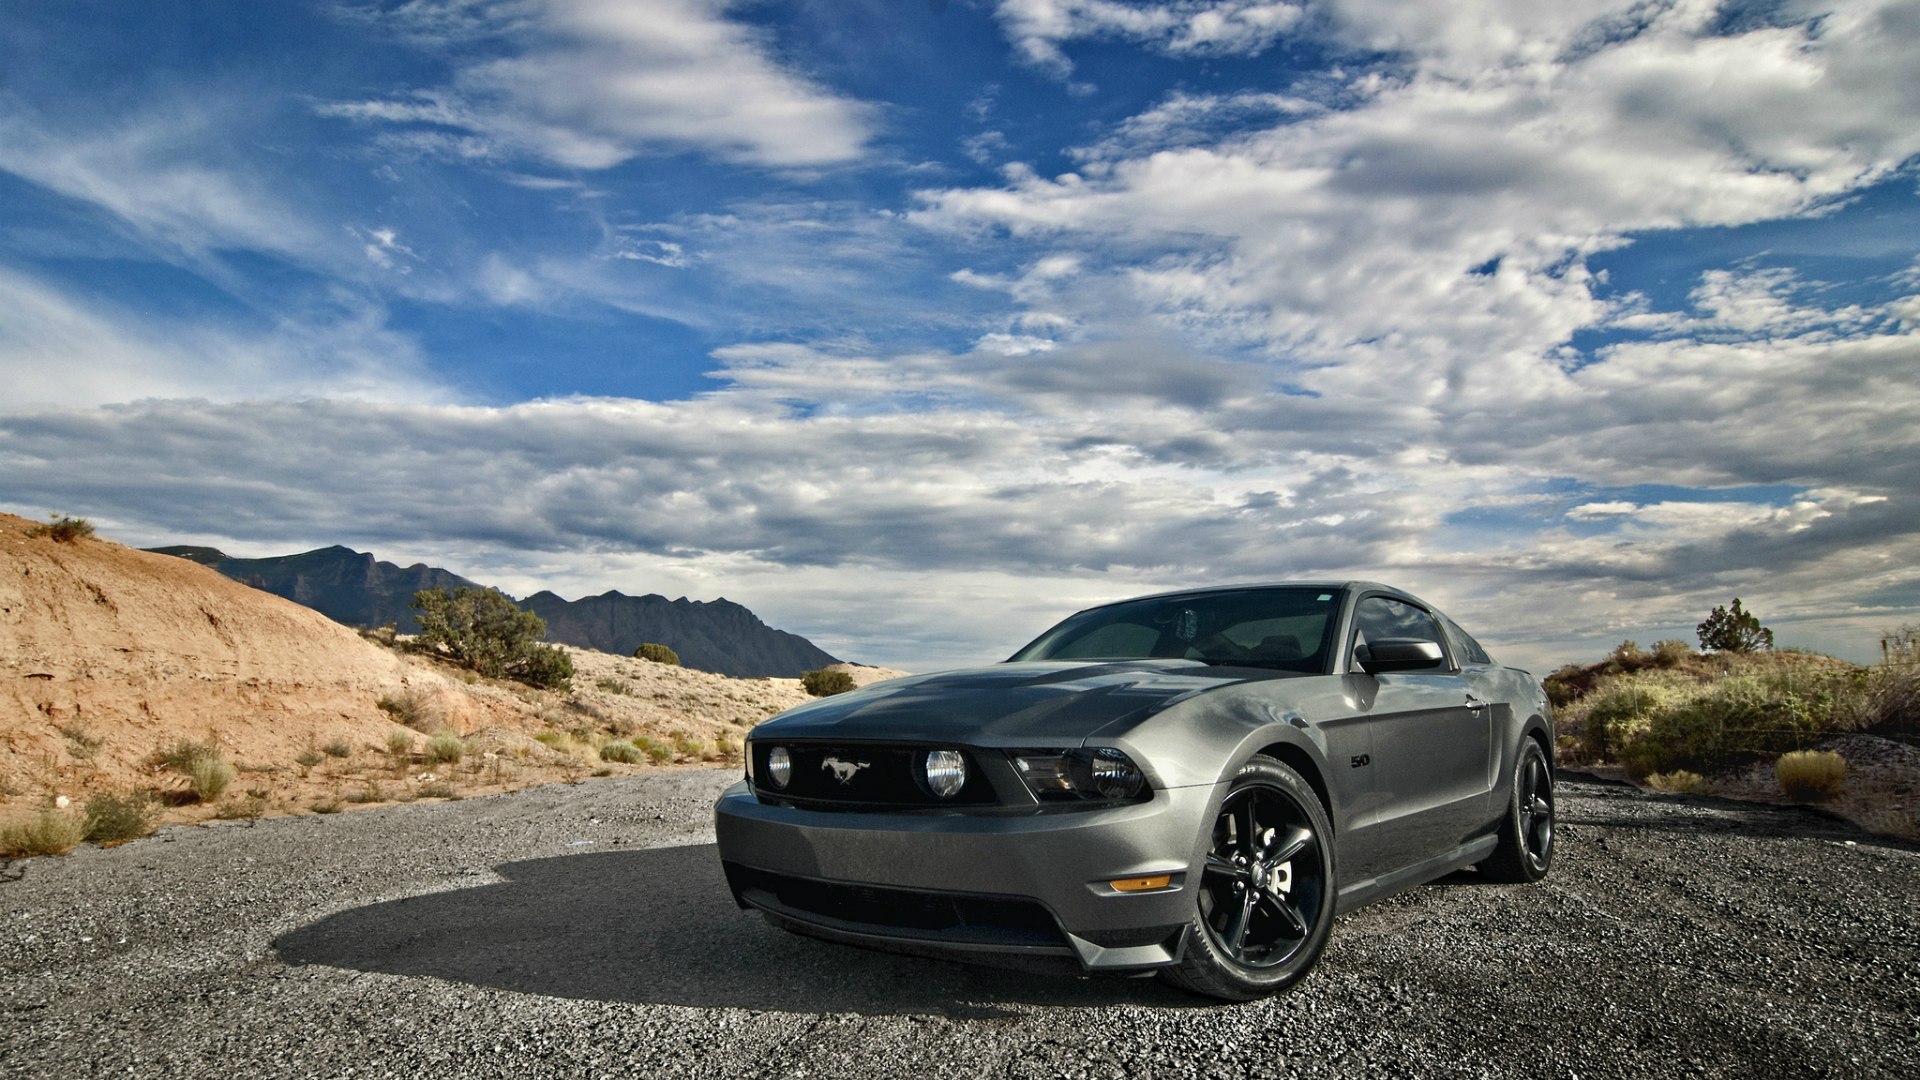 Ford Mustang gt 5.0 2005